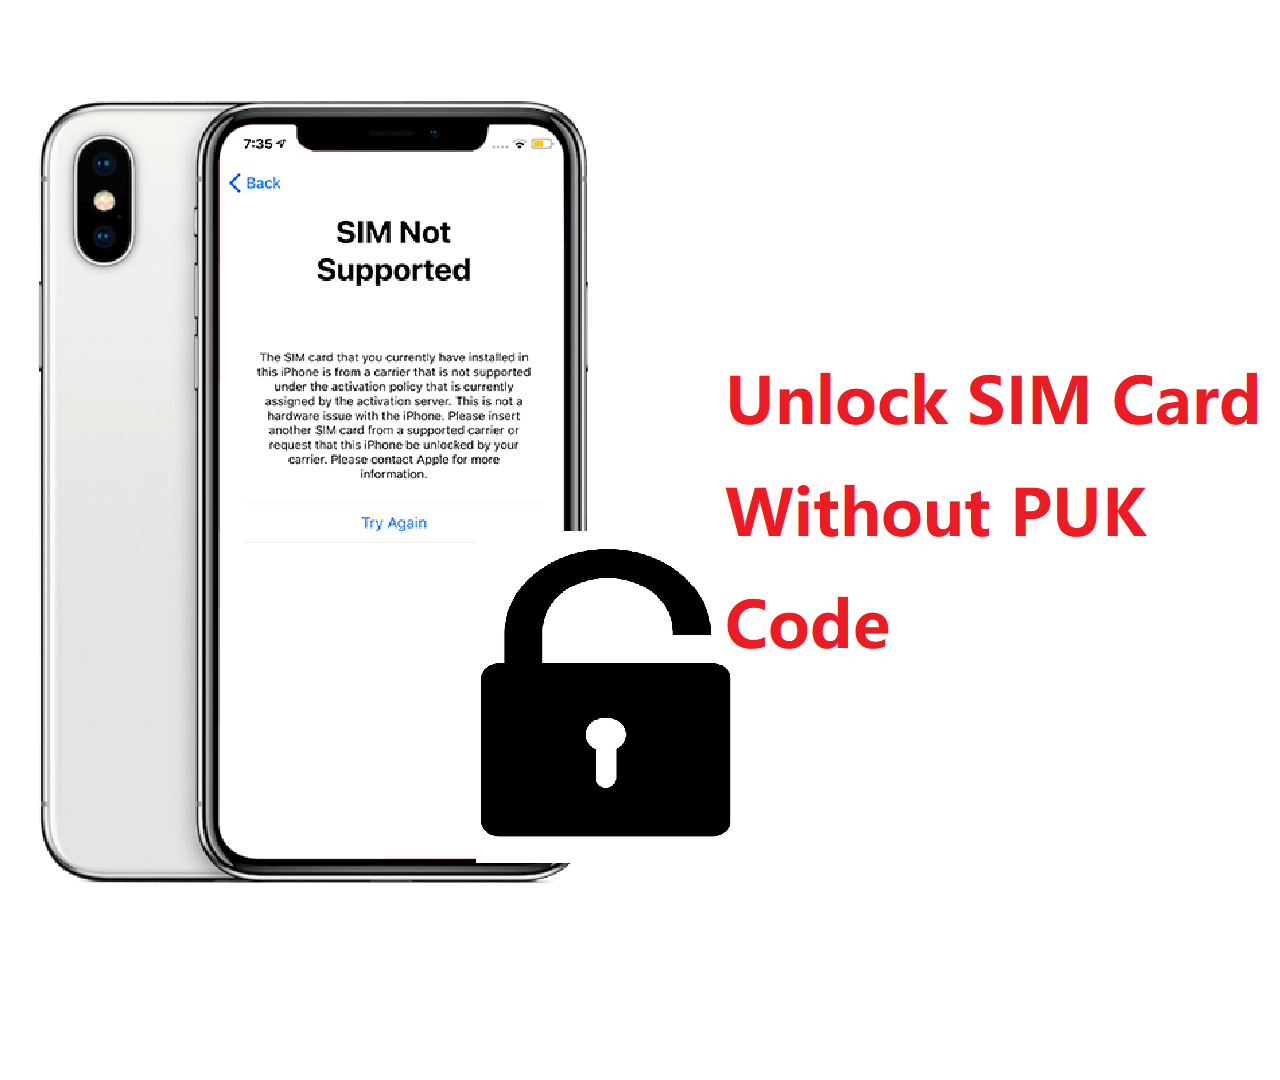 What is the code to unlock a SIM card?